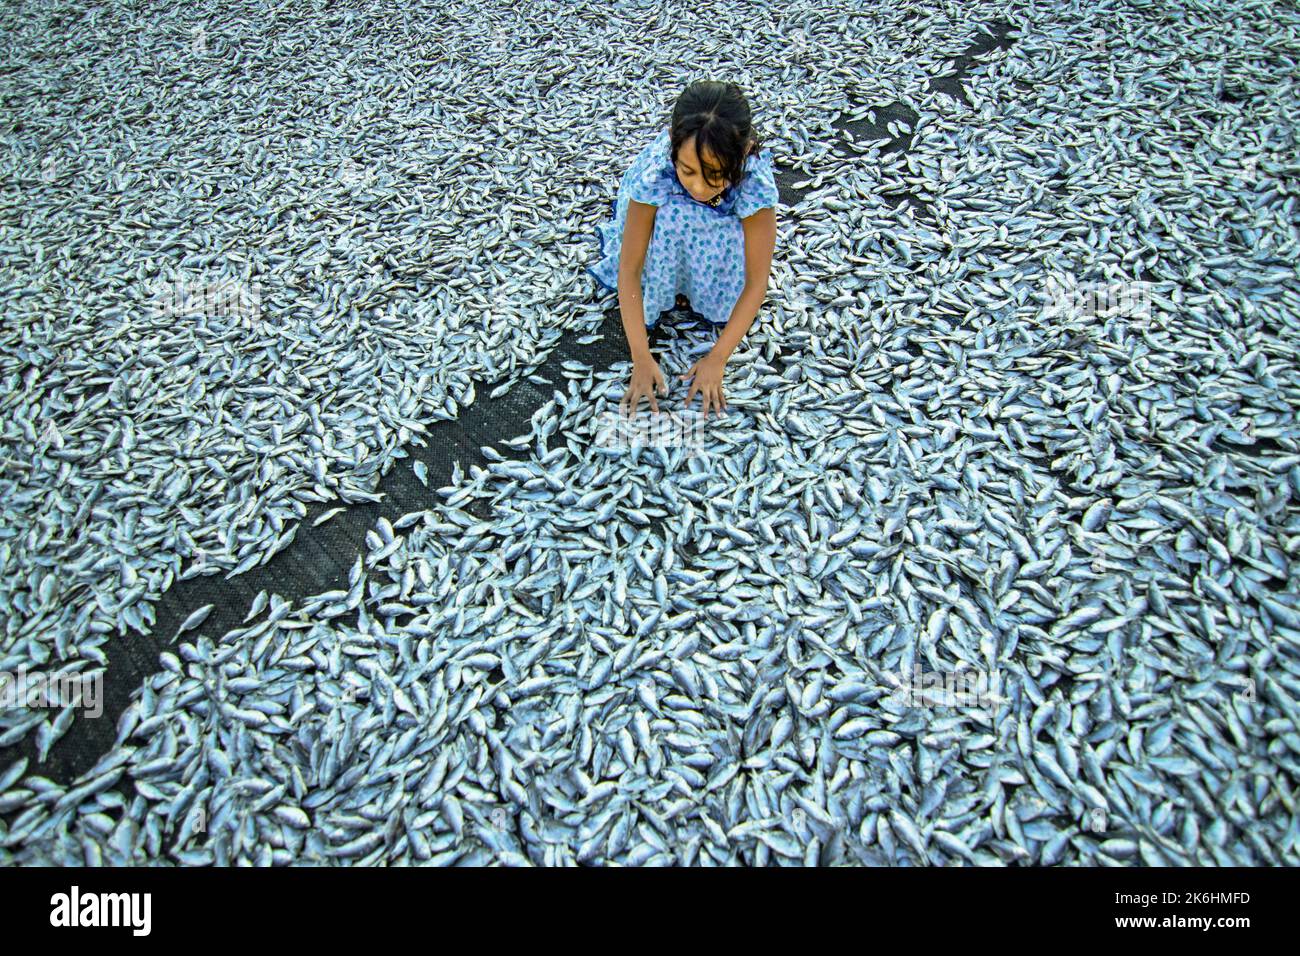 Women process small fishes for dry fish business. Workers cut and clean the fishes, add salt and then dry them on a bamboo platform. Stock Photo